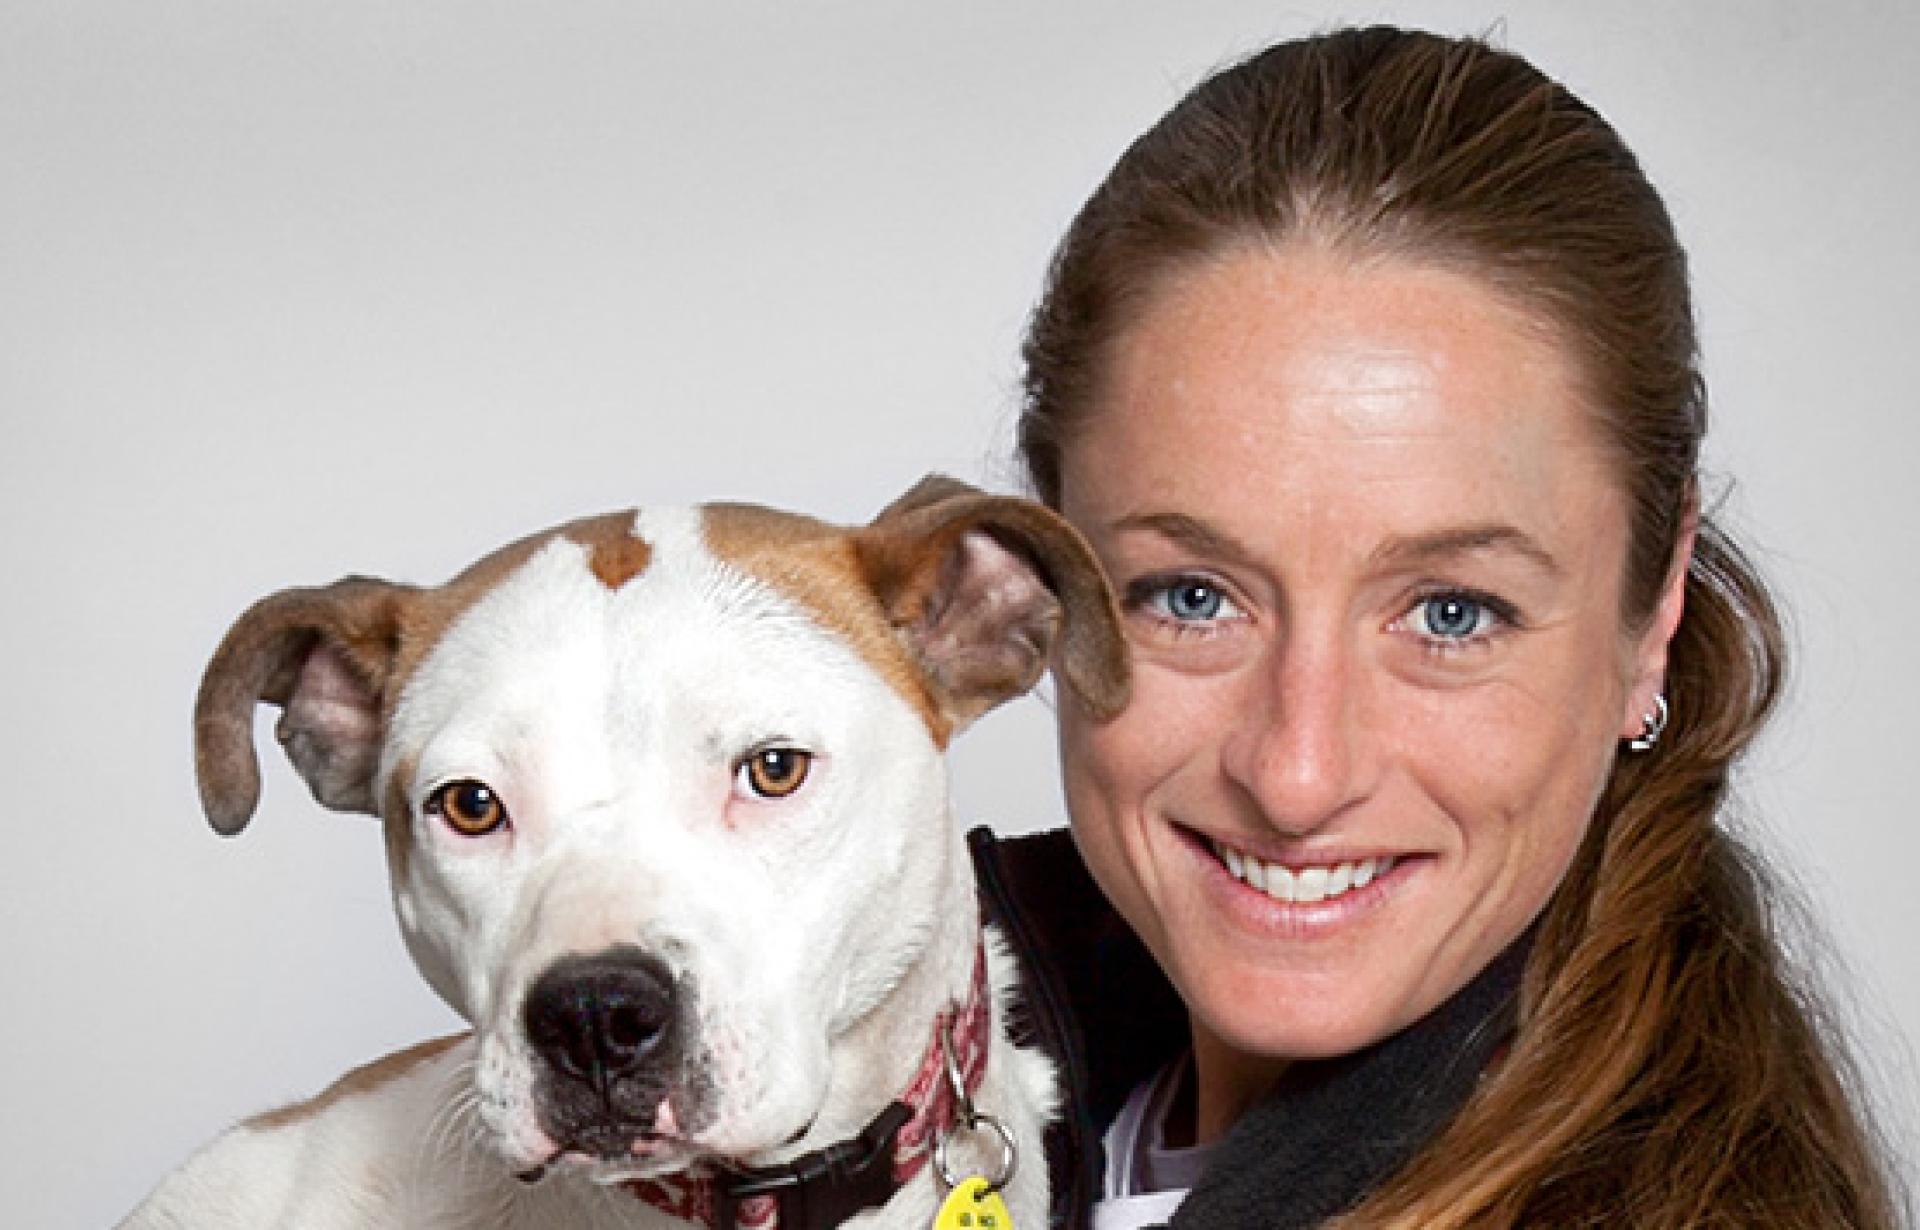 Michelle Logan, Director of National Shelter Embed Programming, with a pit bull terrier dog